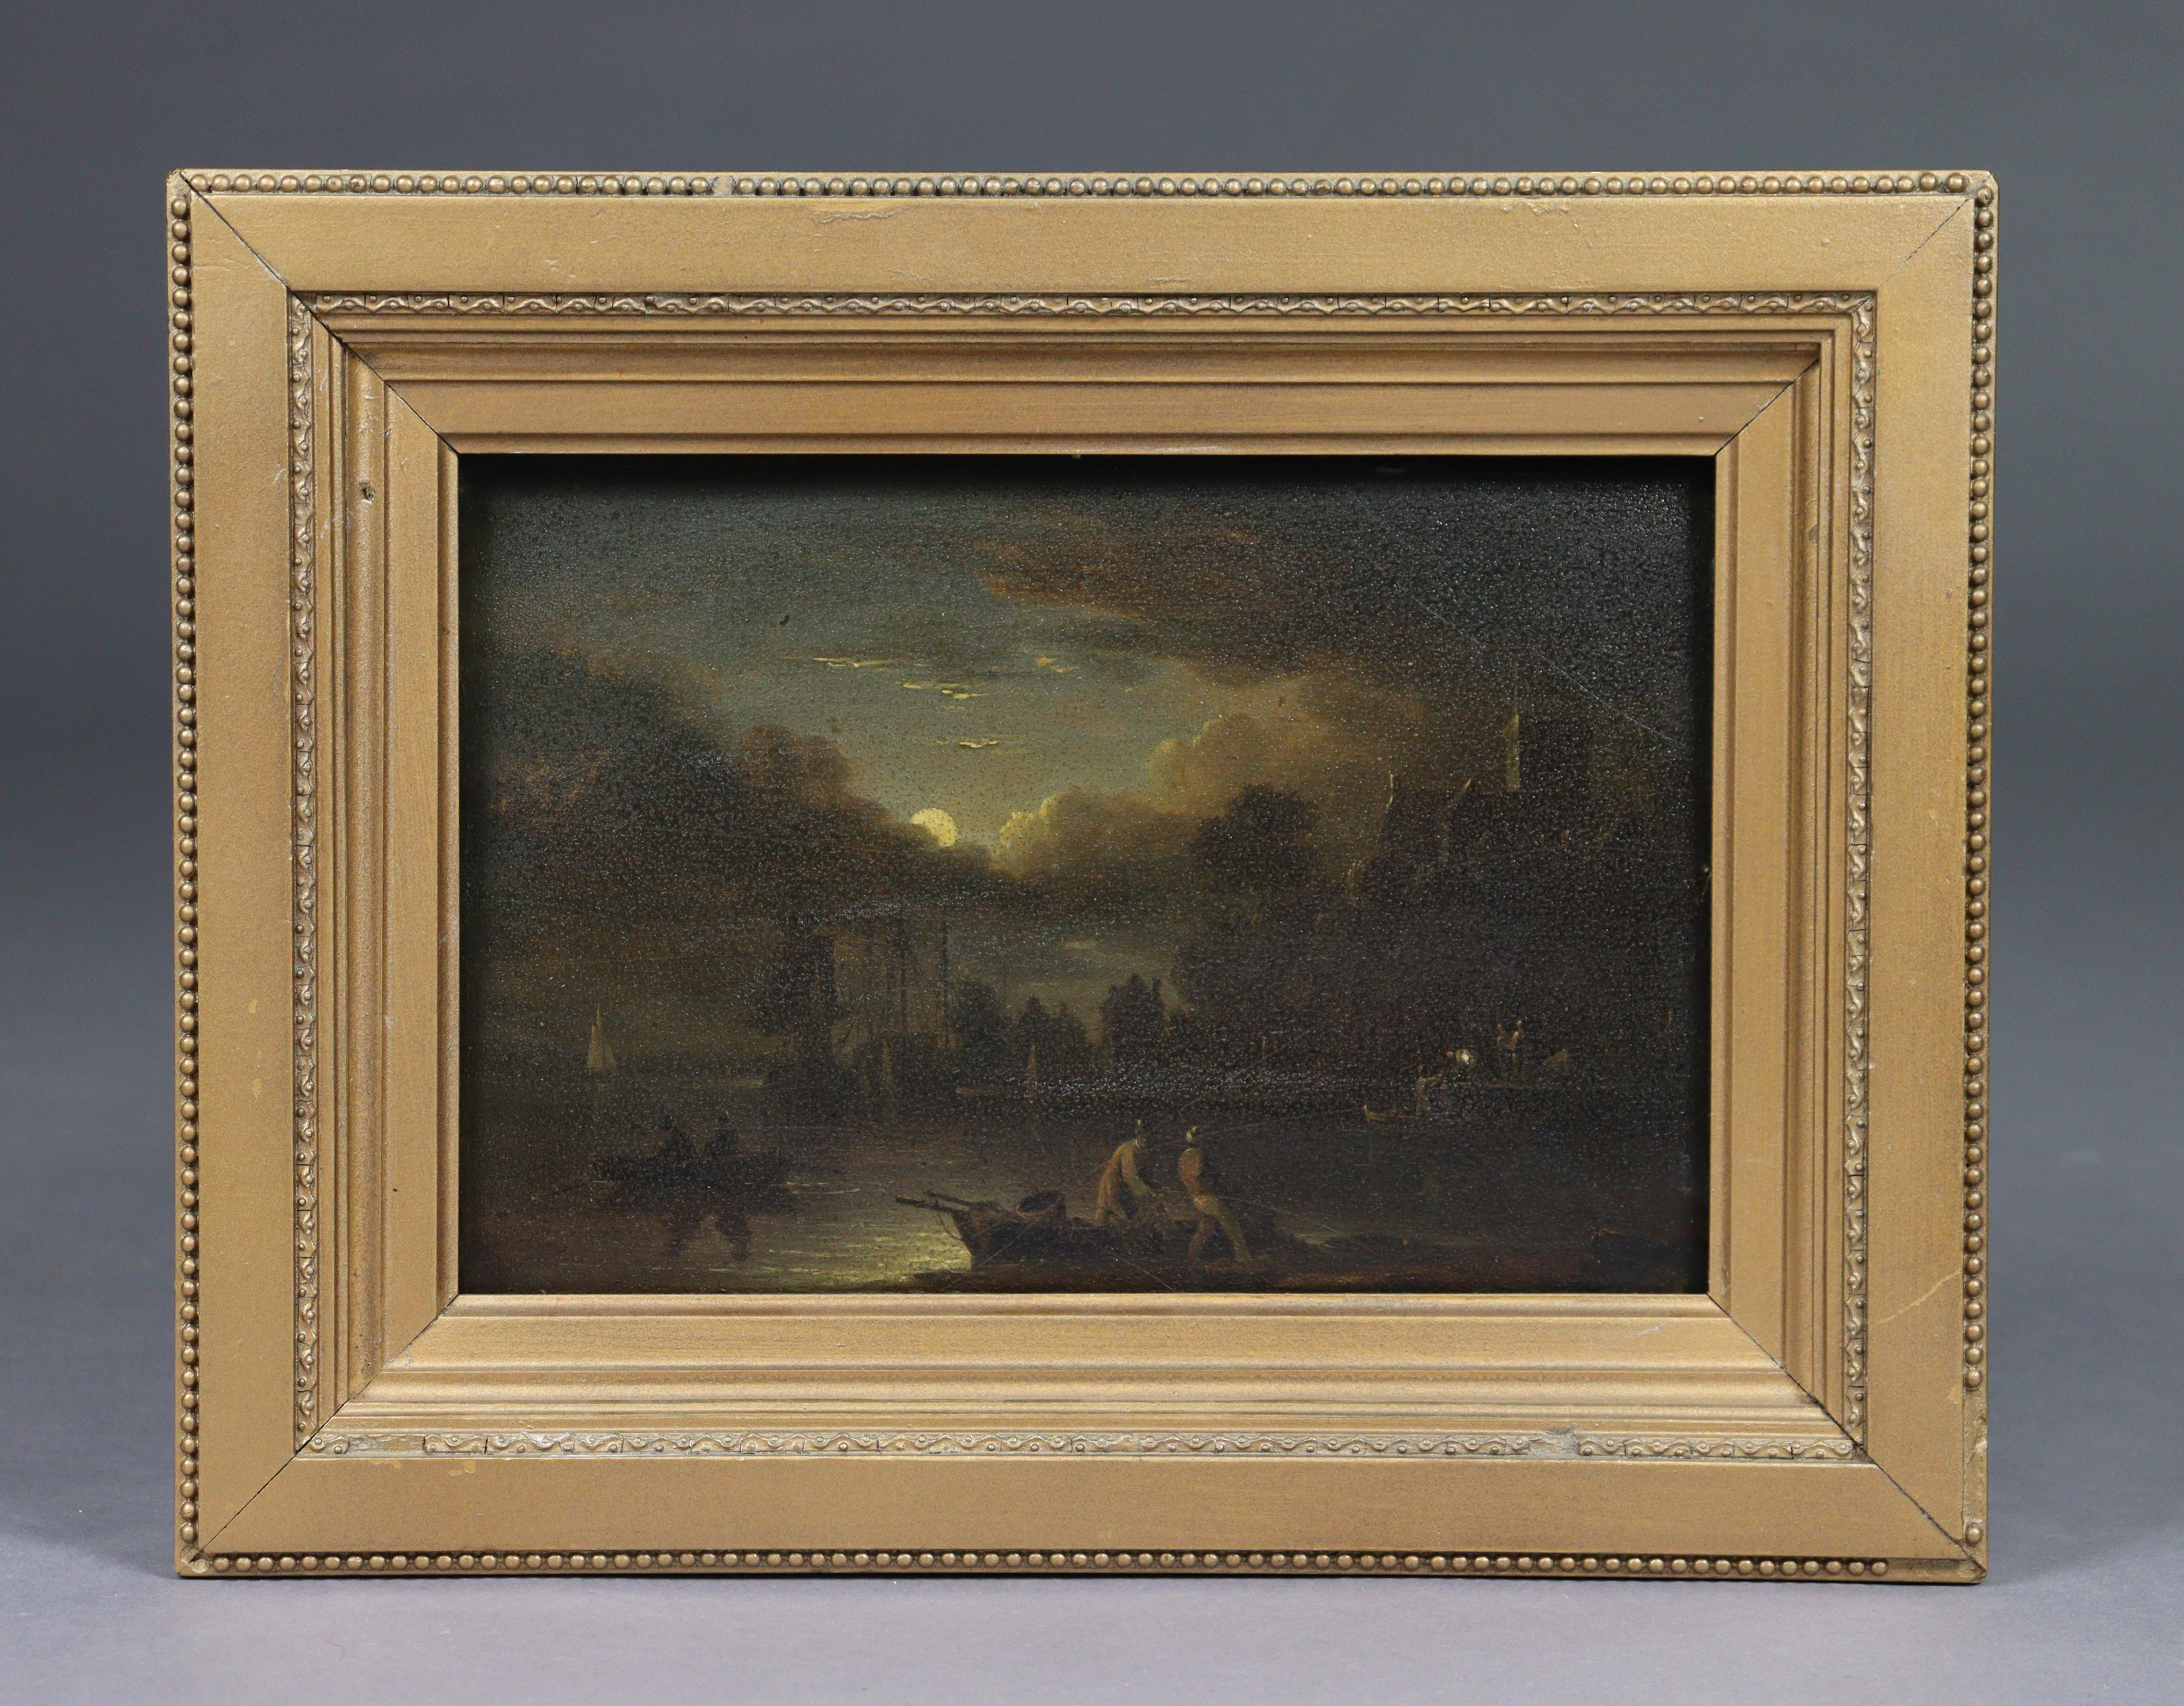 ENGLISH SCHOOL, late 18th century/early 19th century. A moonlit harbour scene with figures unloading